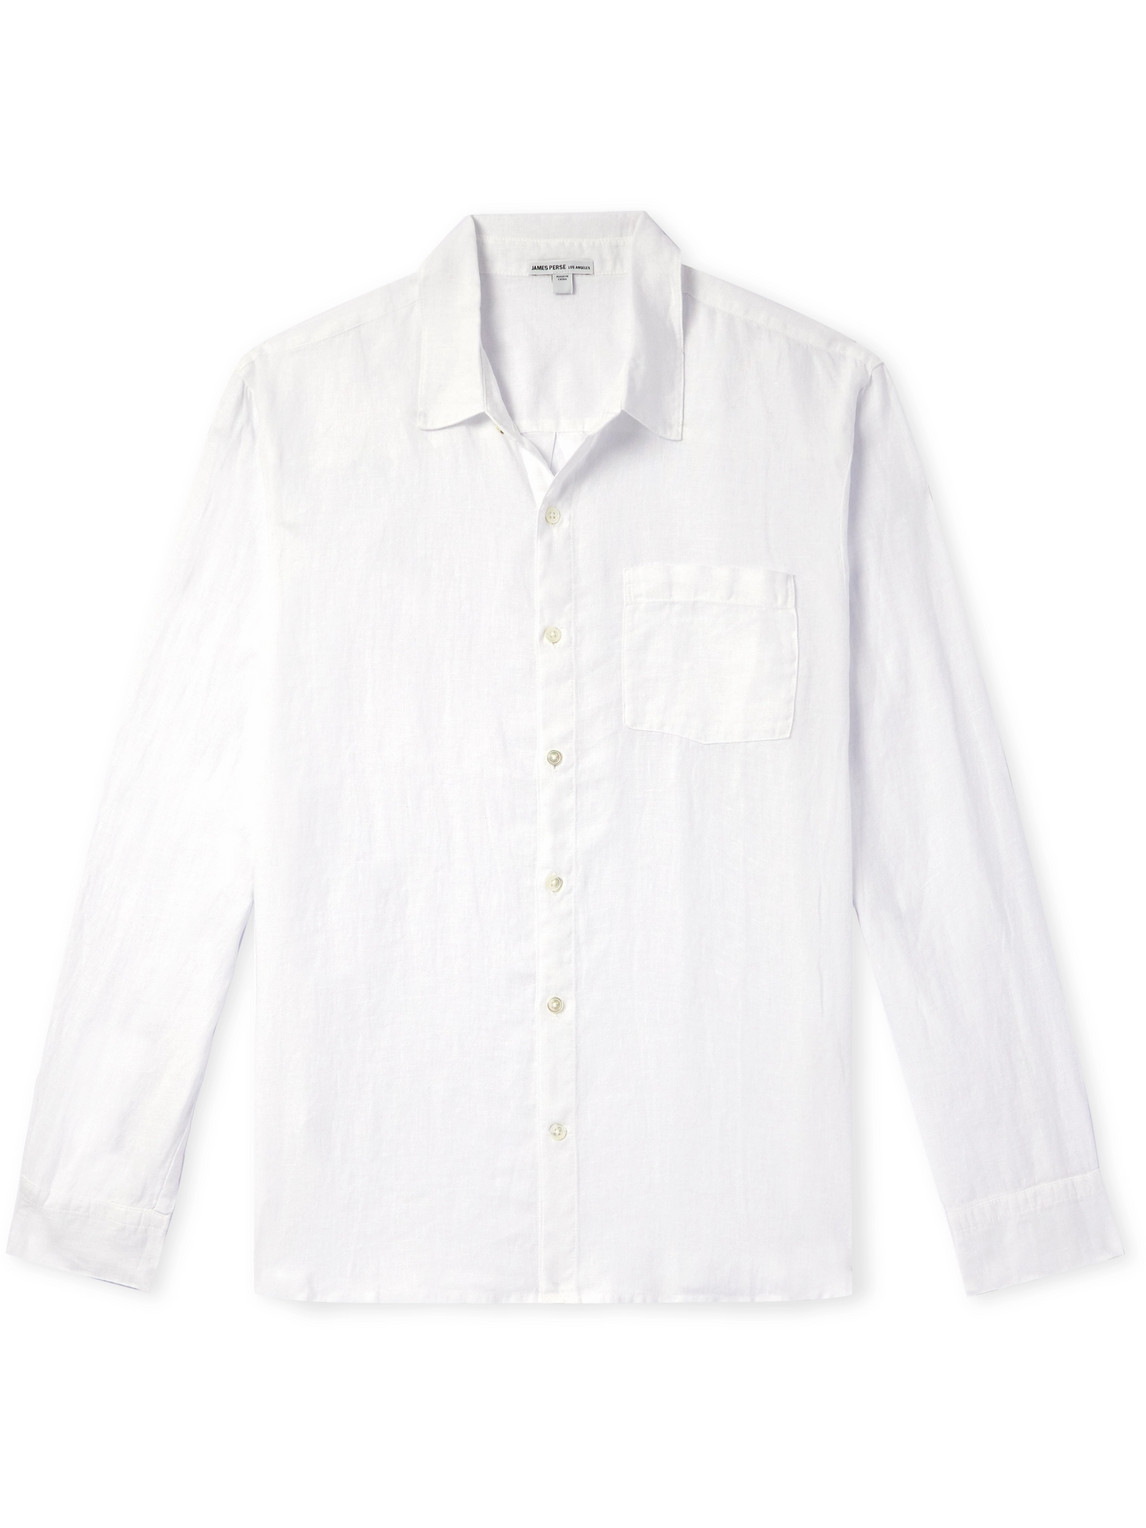 James Perse Garment-dyed Linen Shirt In White